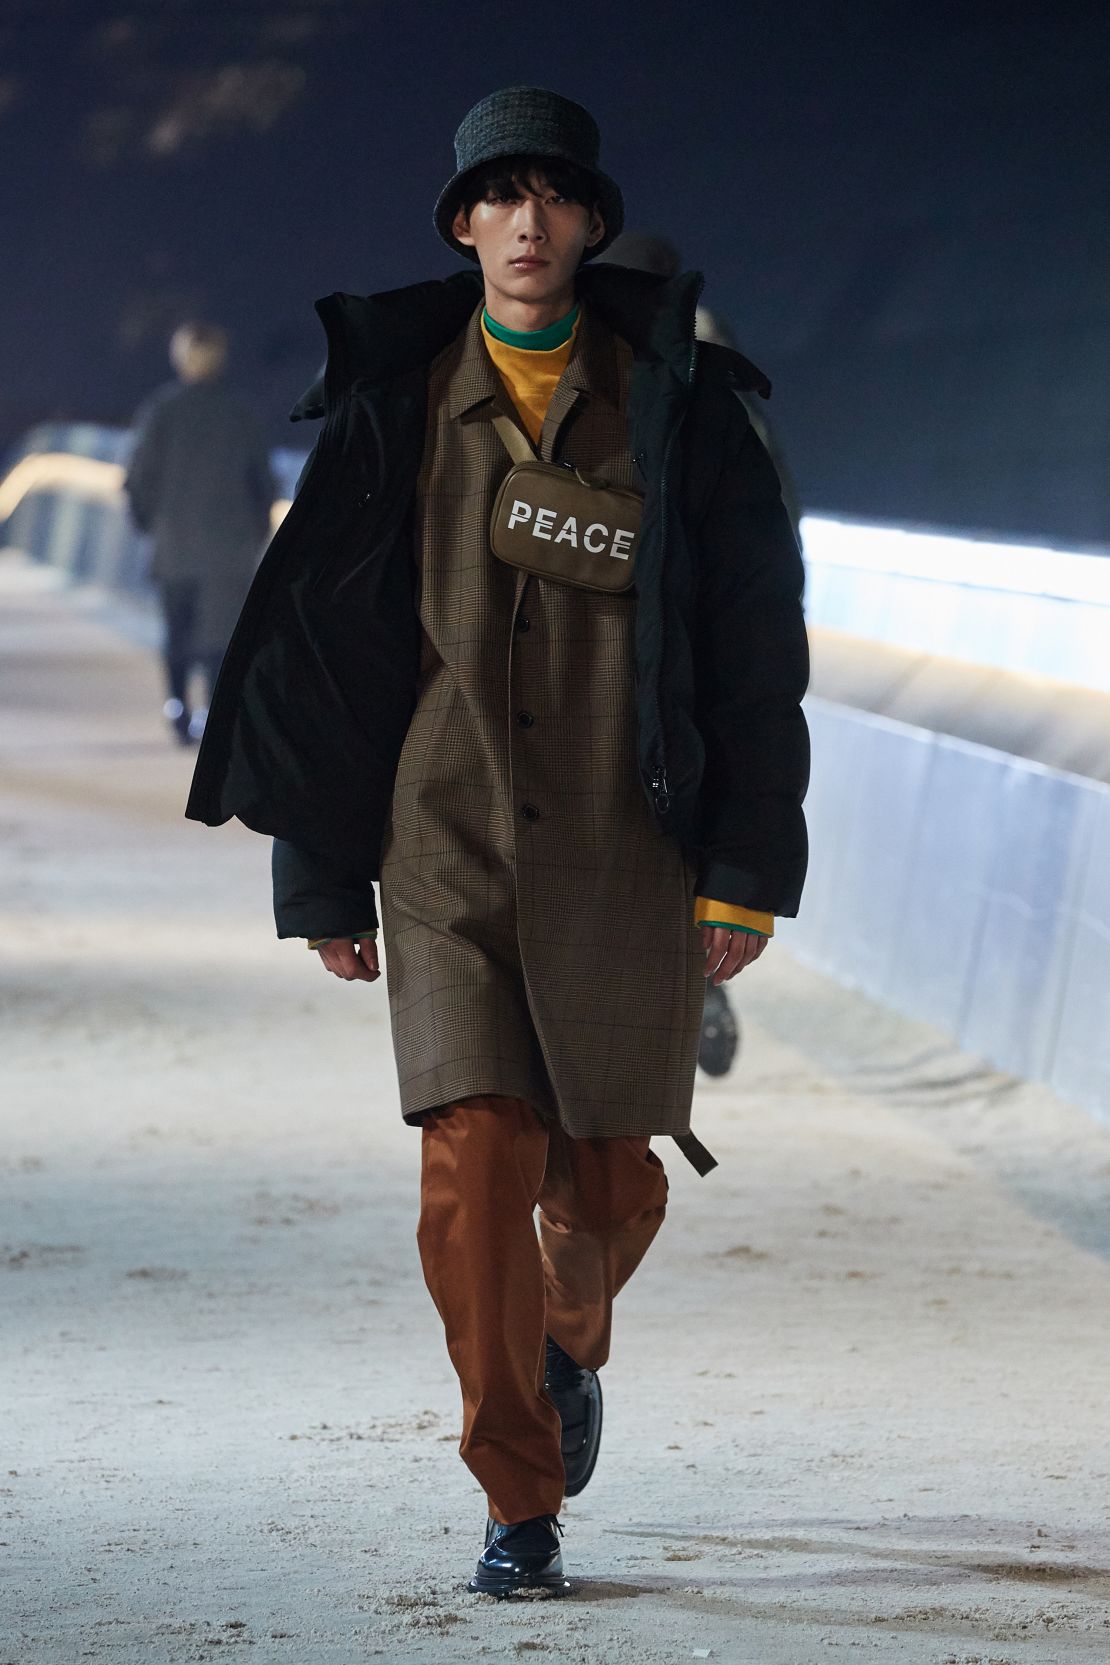 Seoul Fashion Week: Designers tackle themes of war and peace | CNN